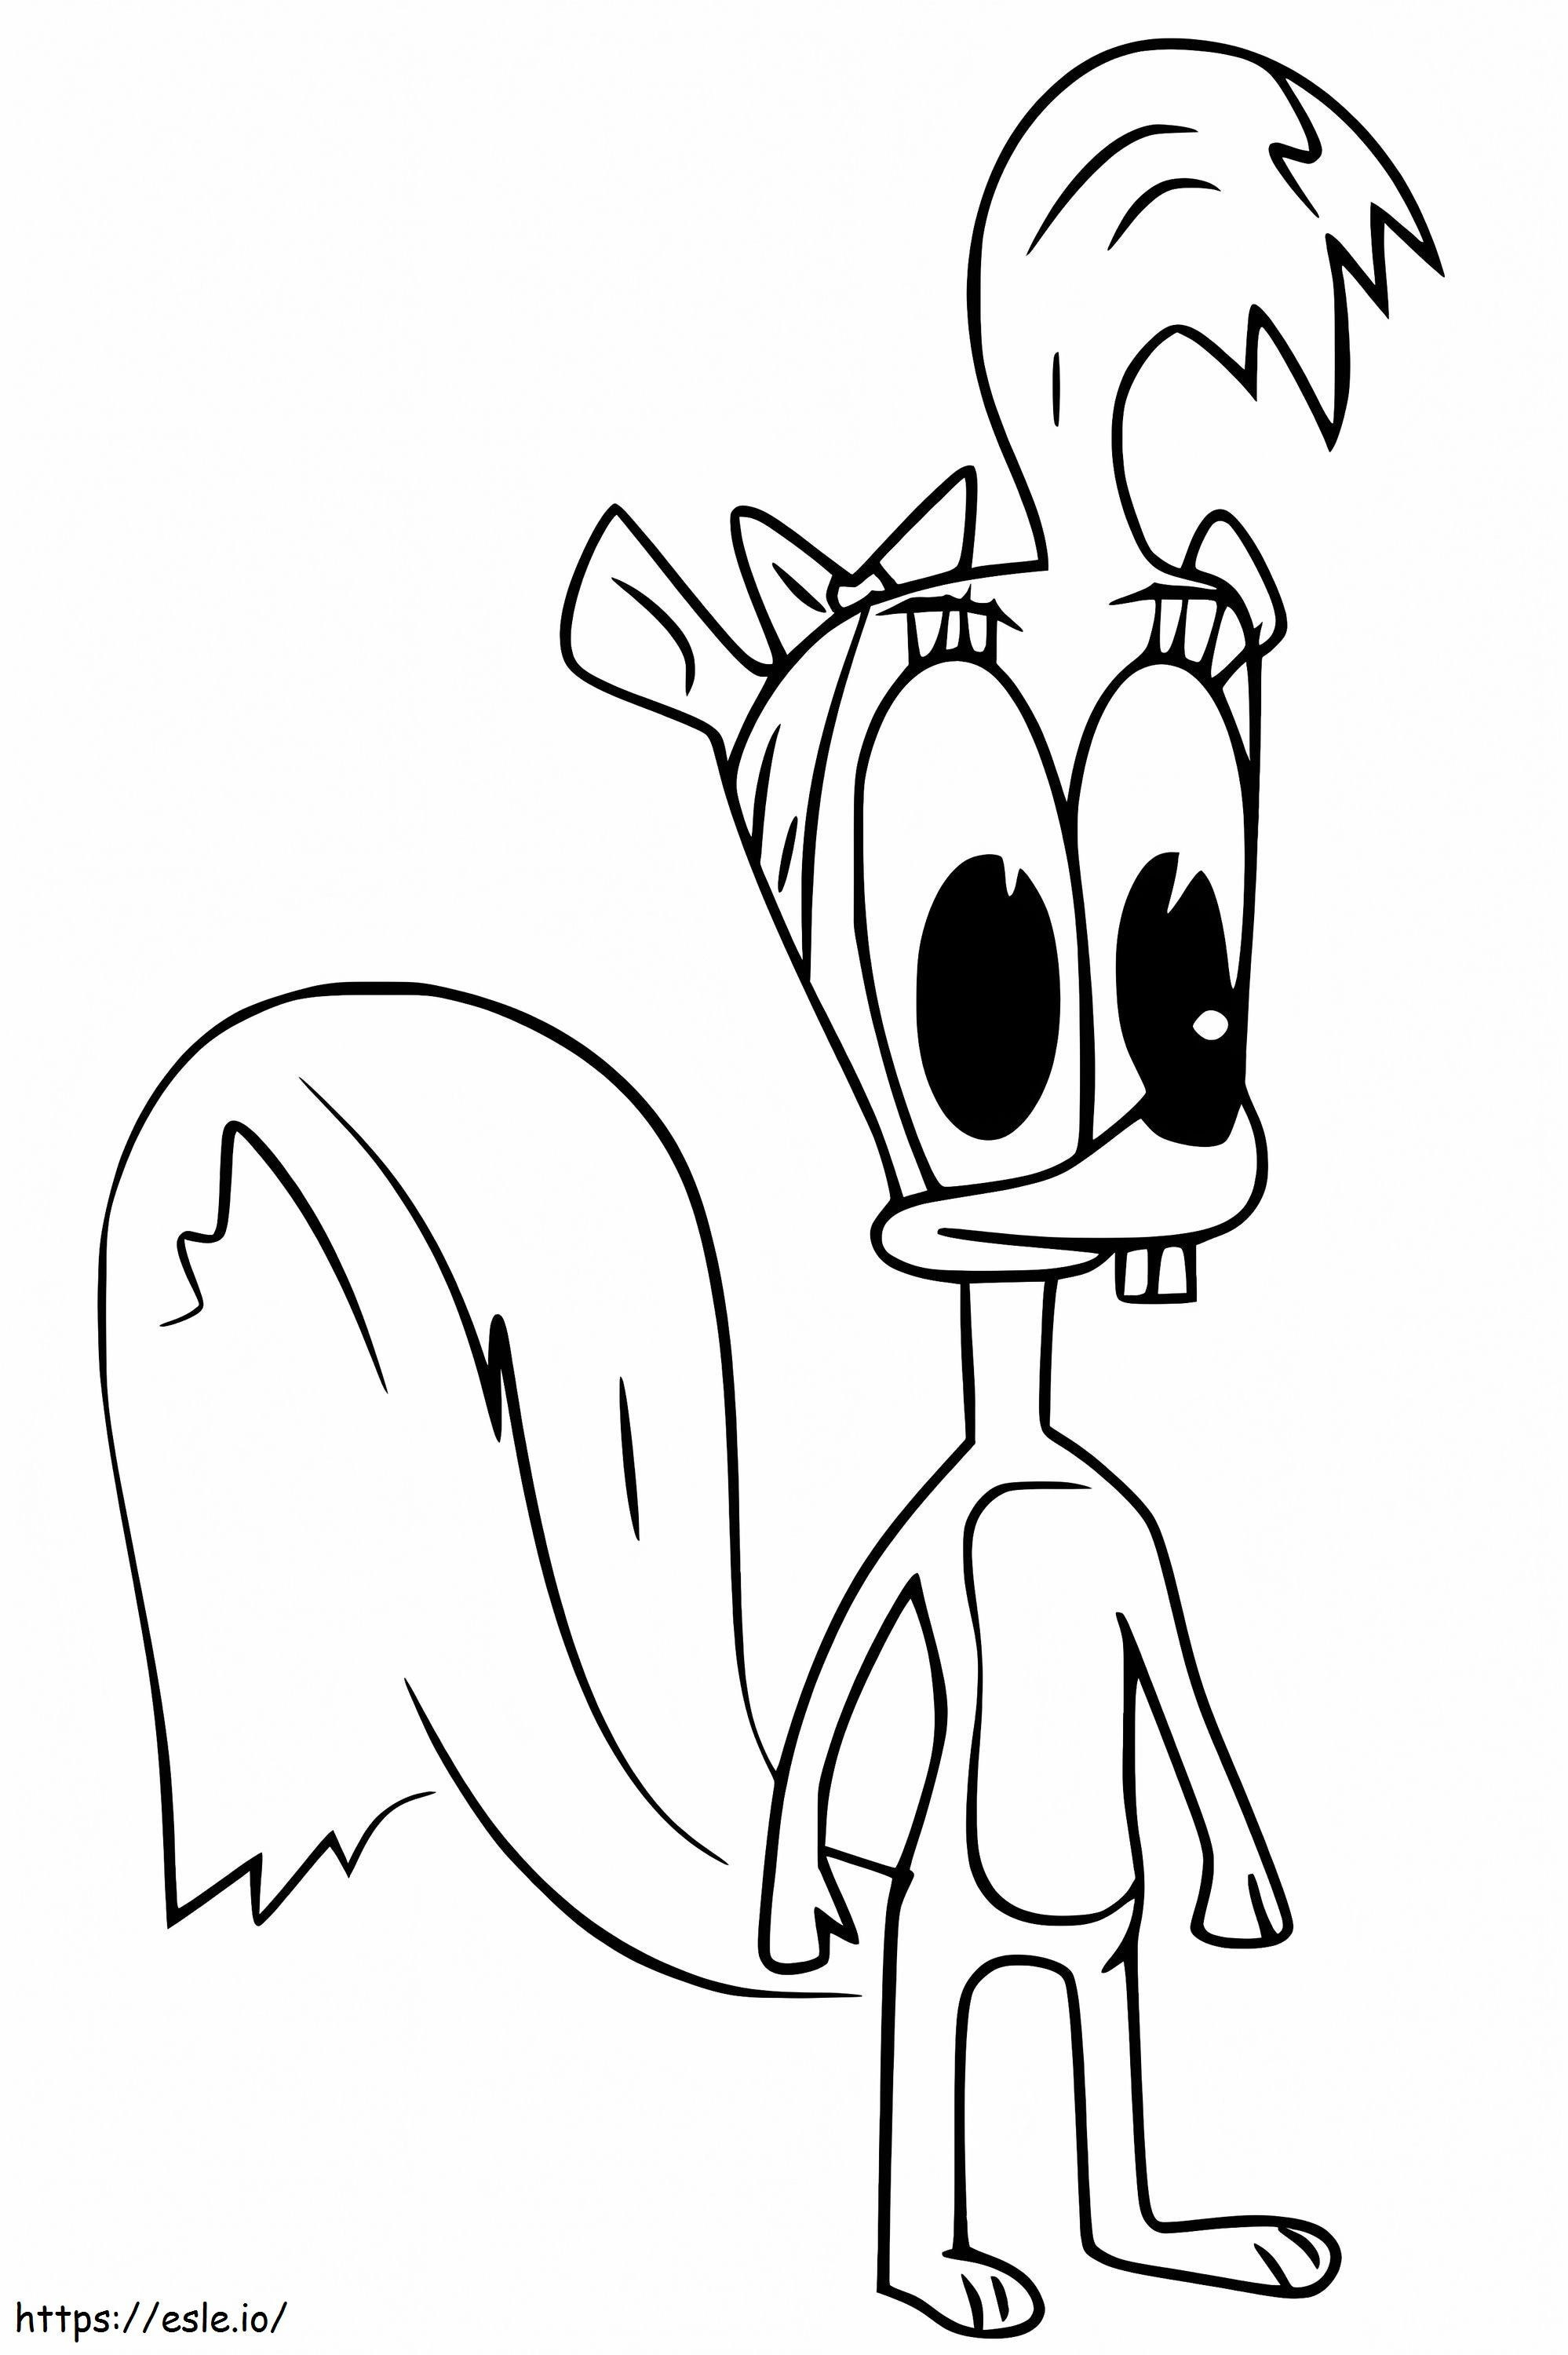 Darlene From Squirrel Boy coloring page